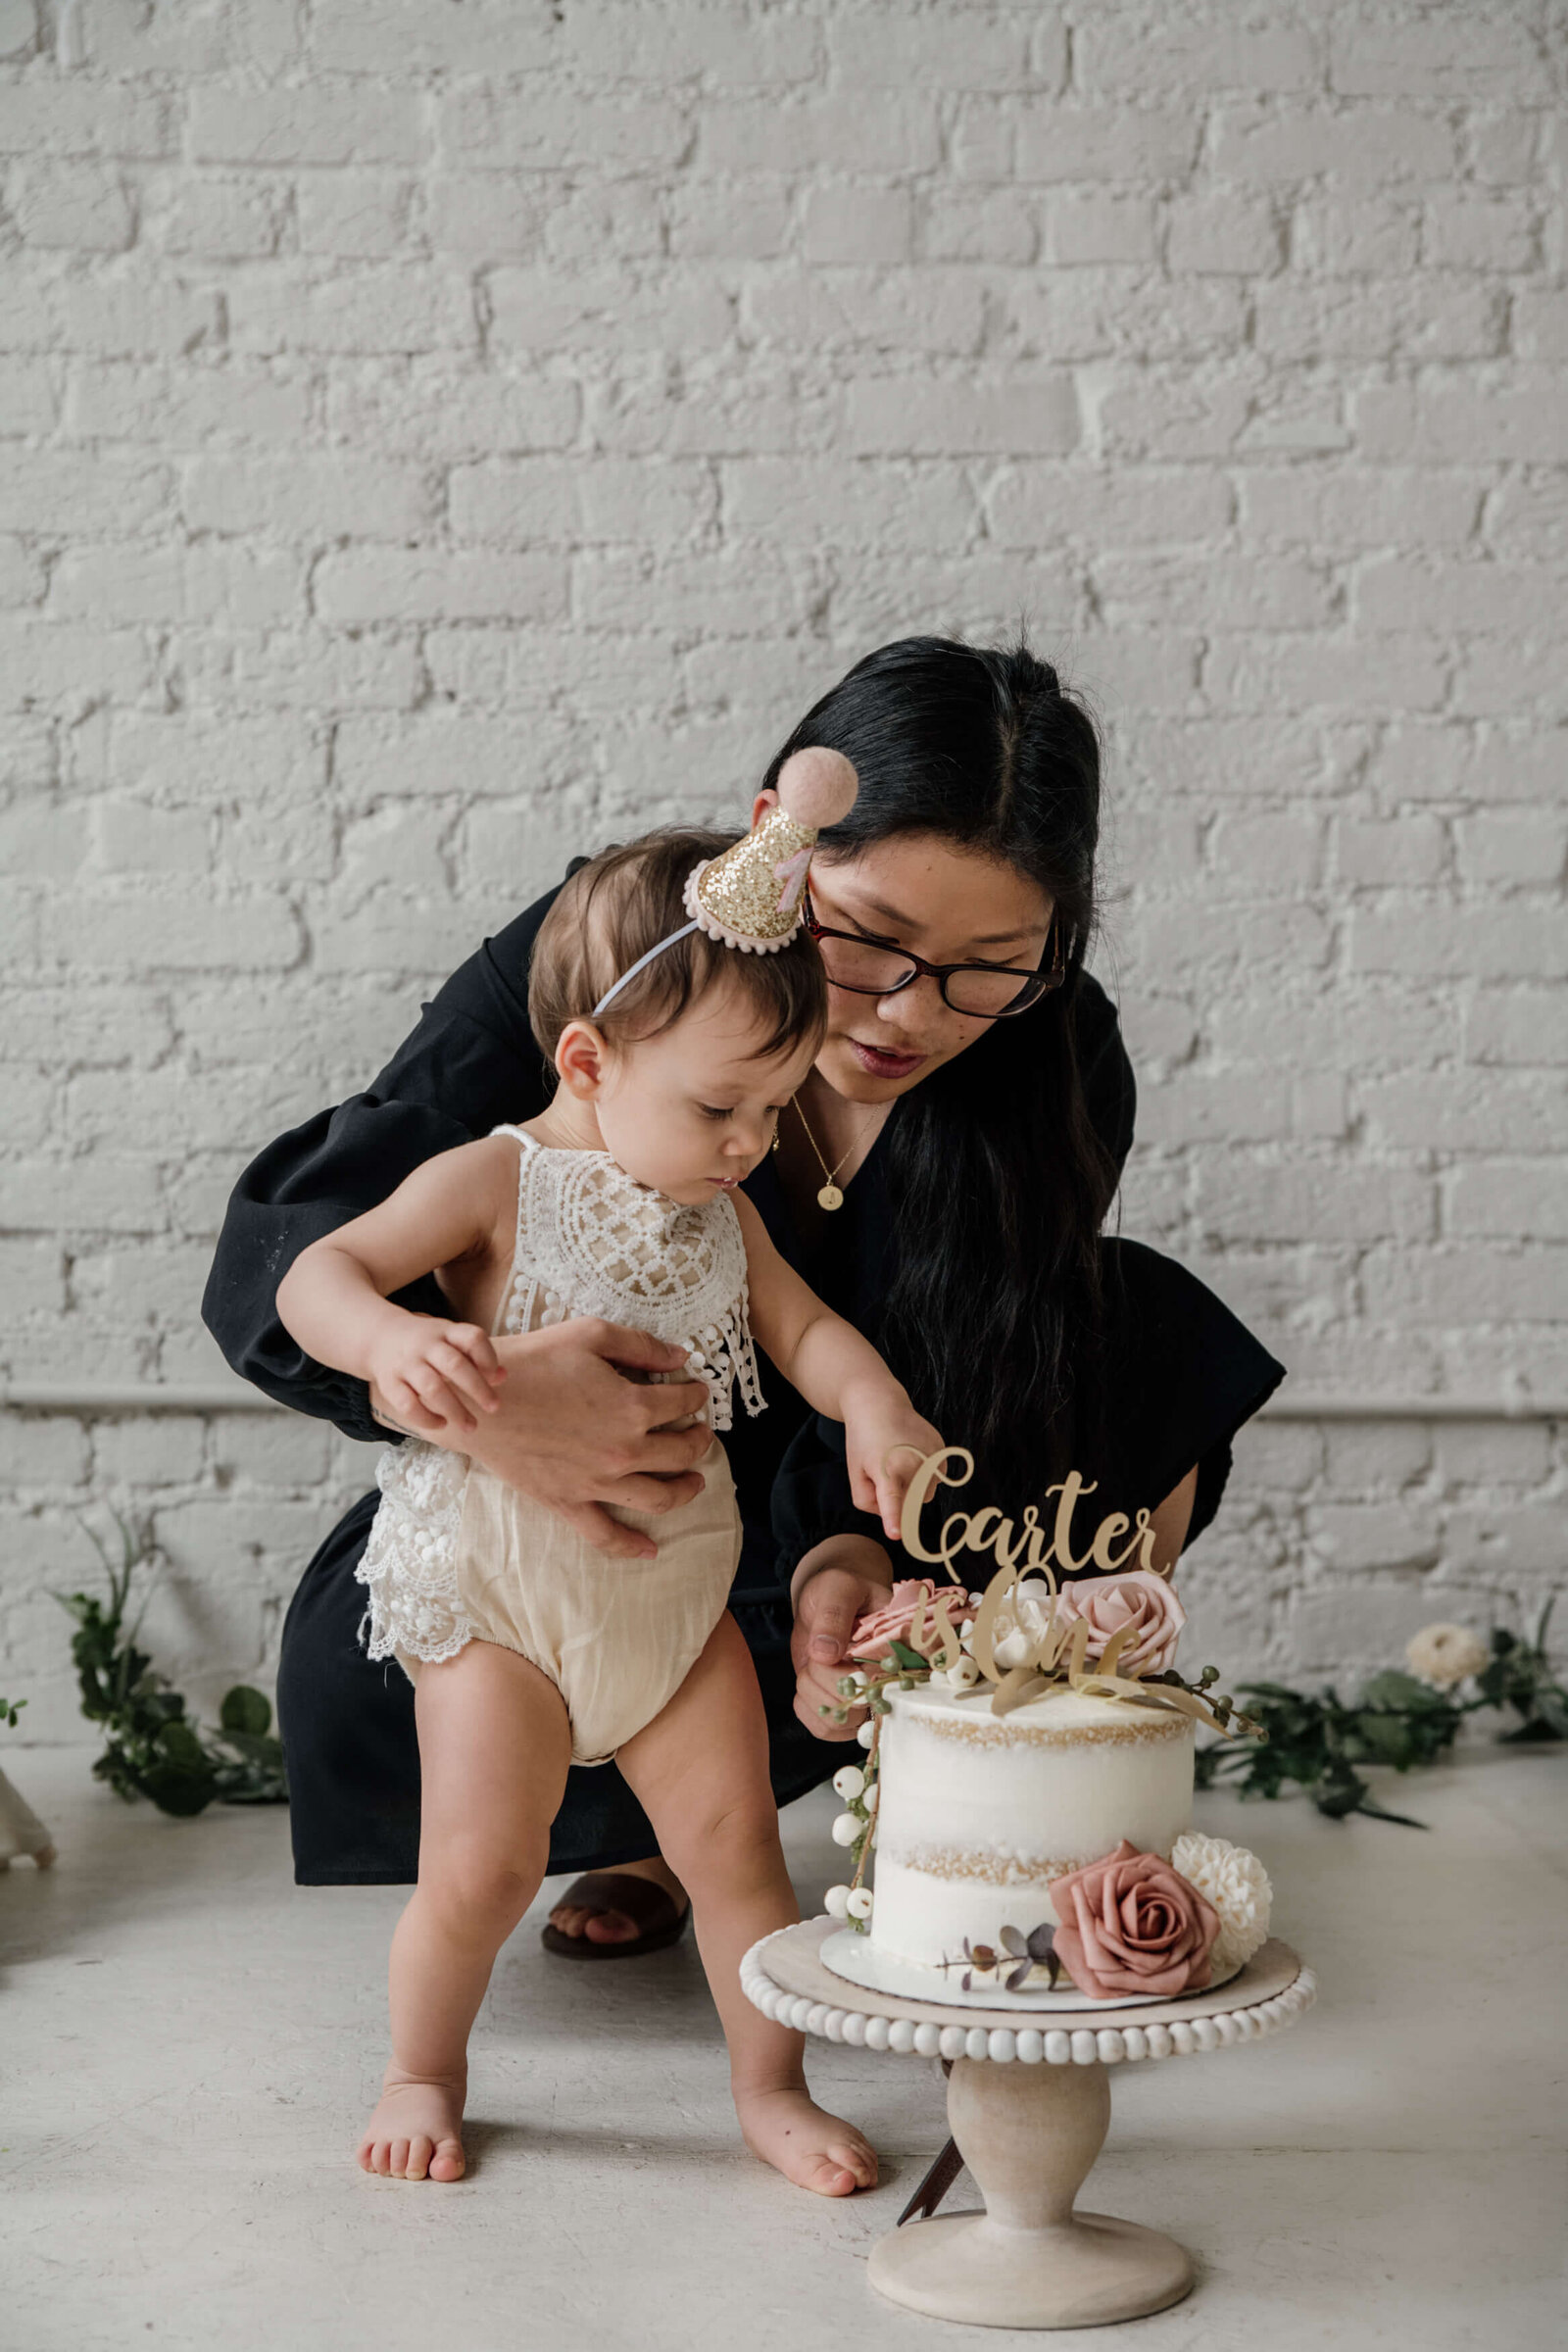 Mom showing baby girl her cake.